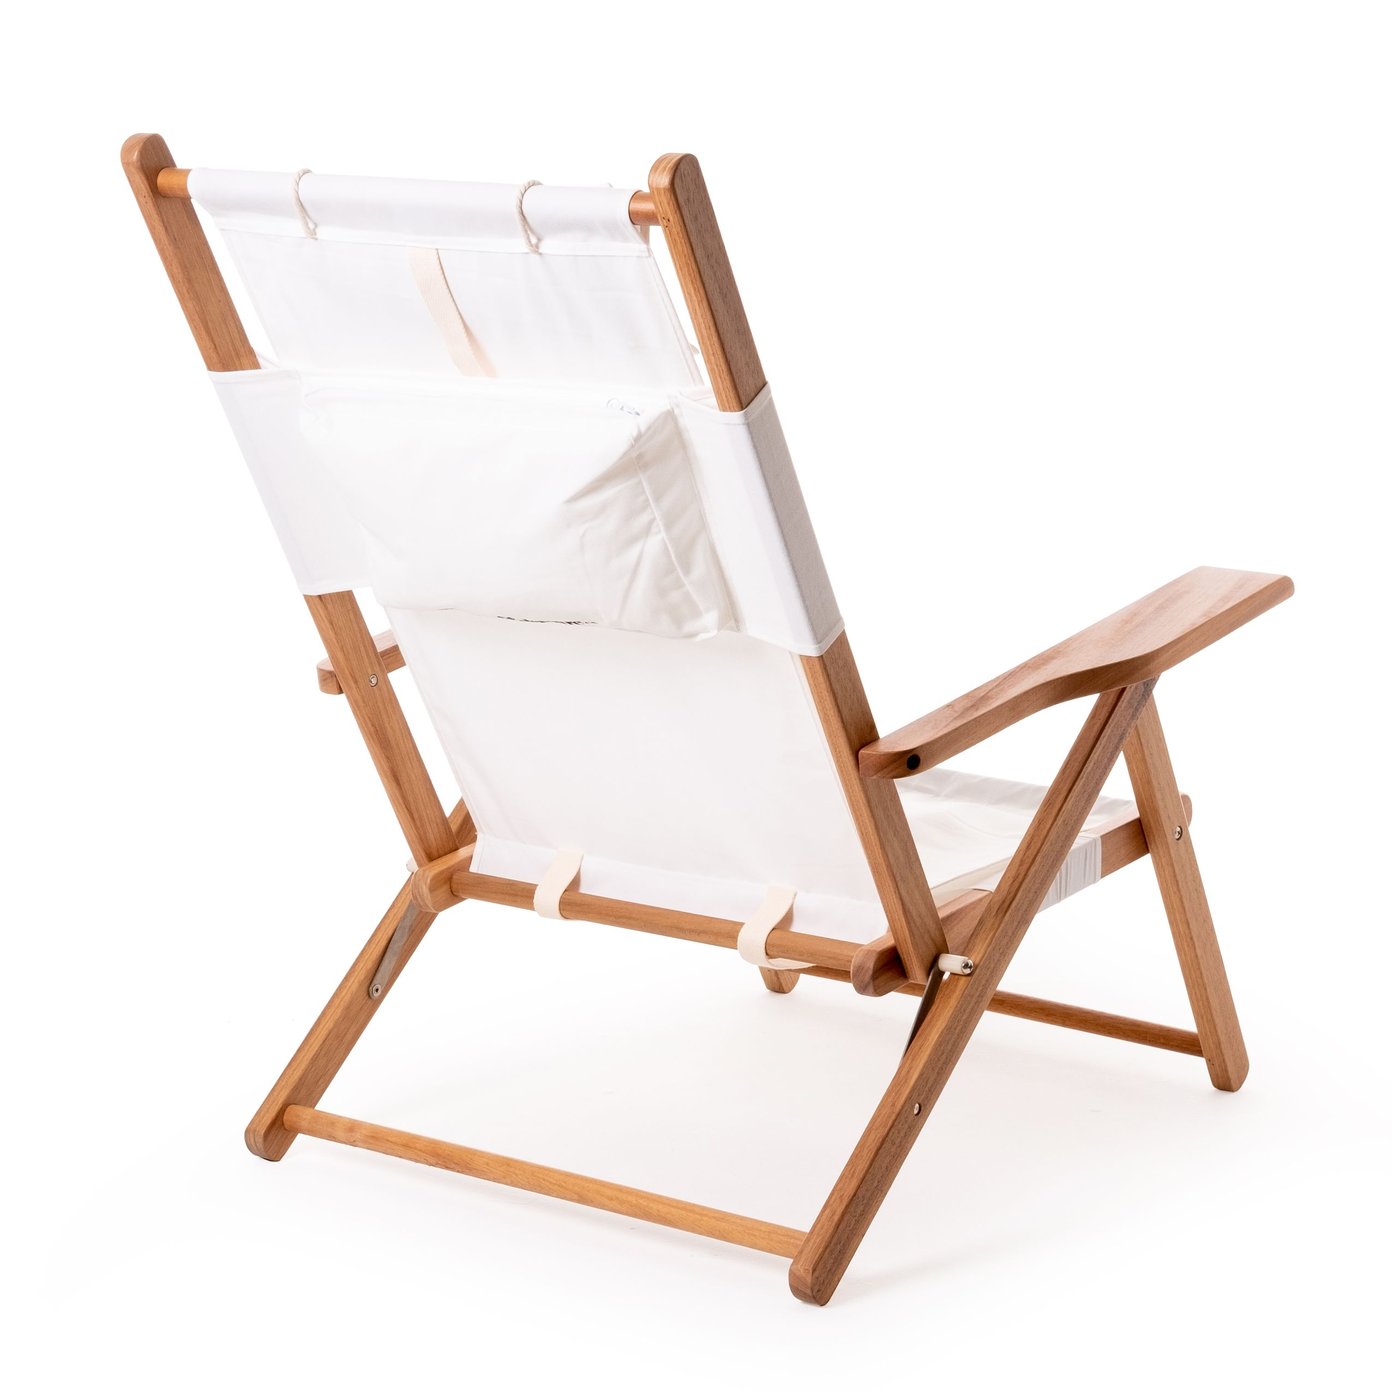 Business & Pleasure Co. The Tommy Chair White | goop